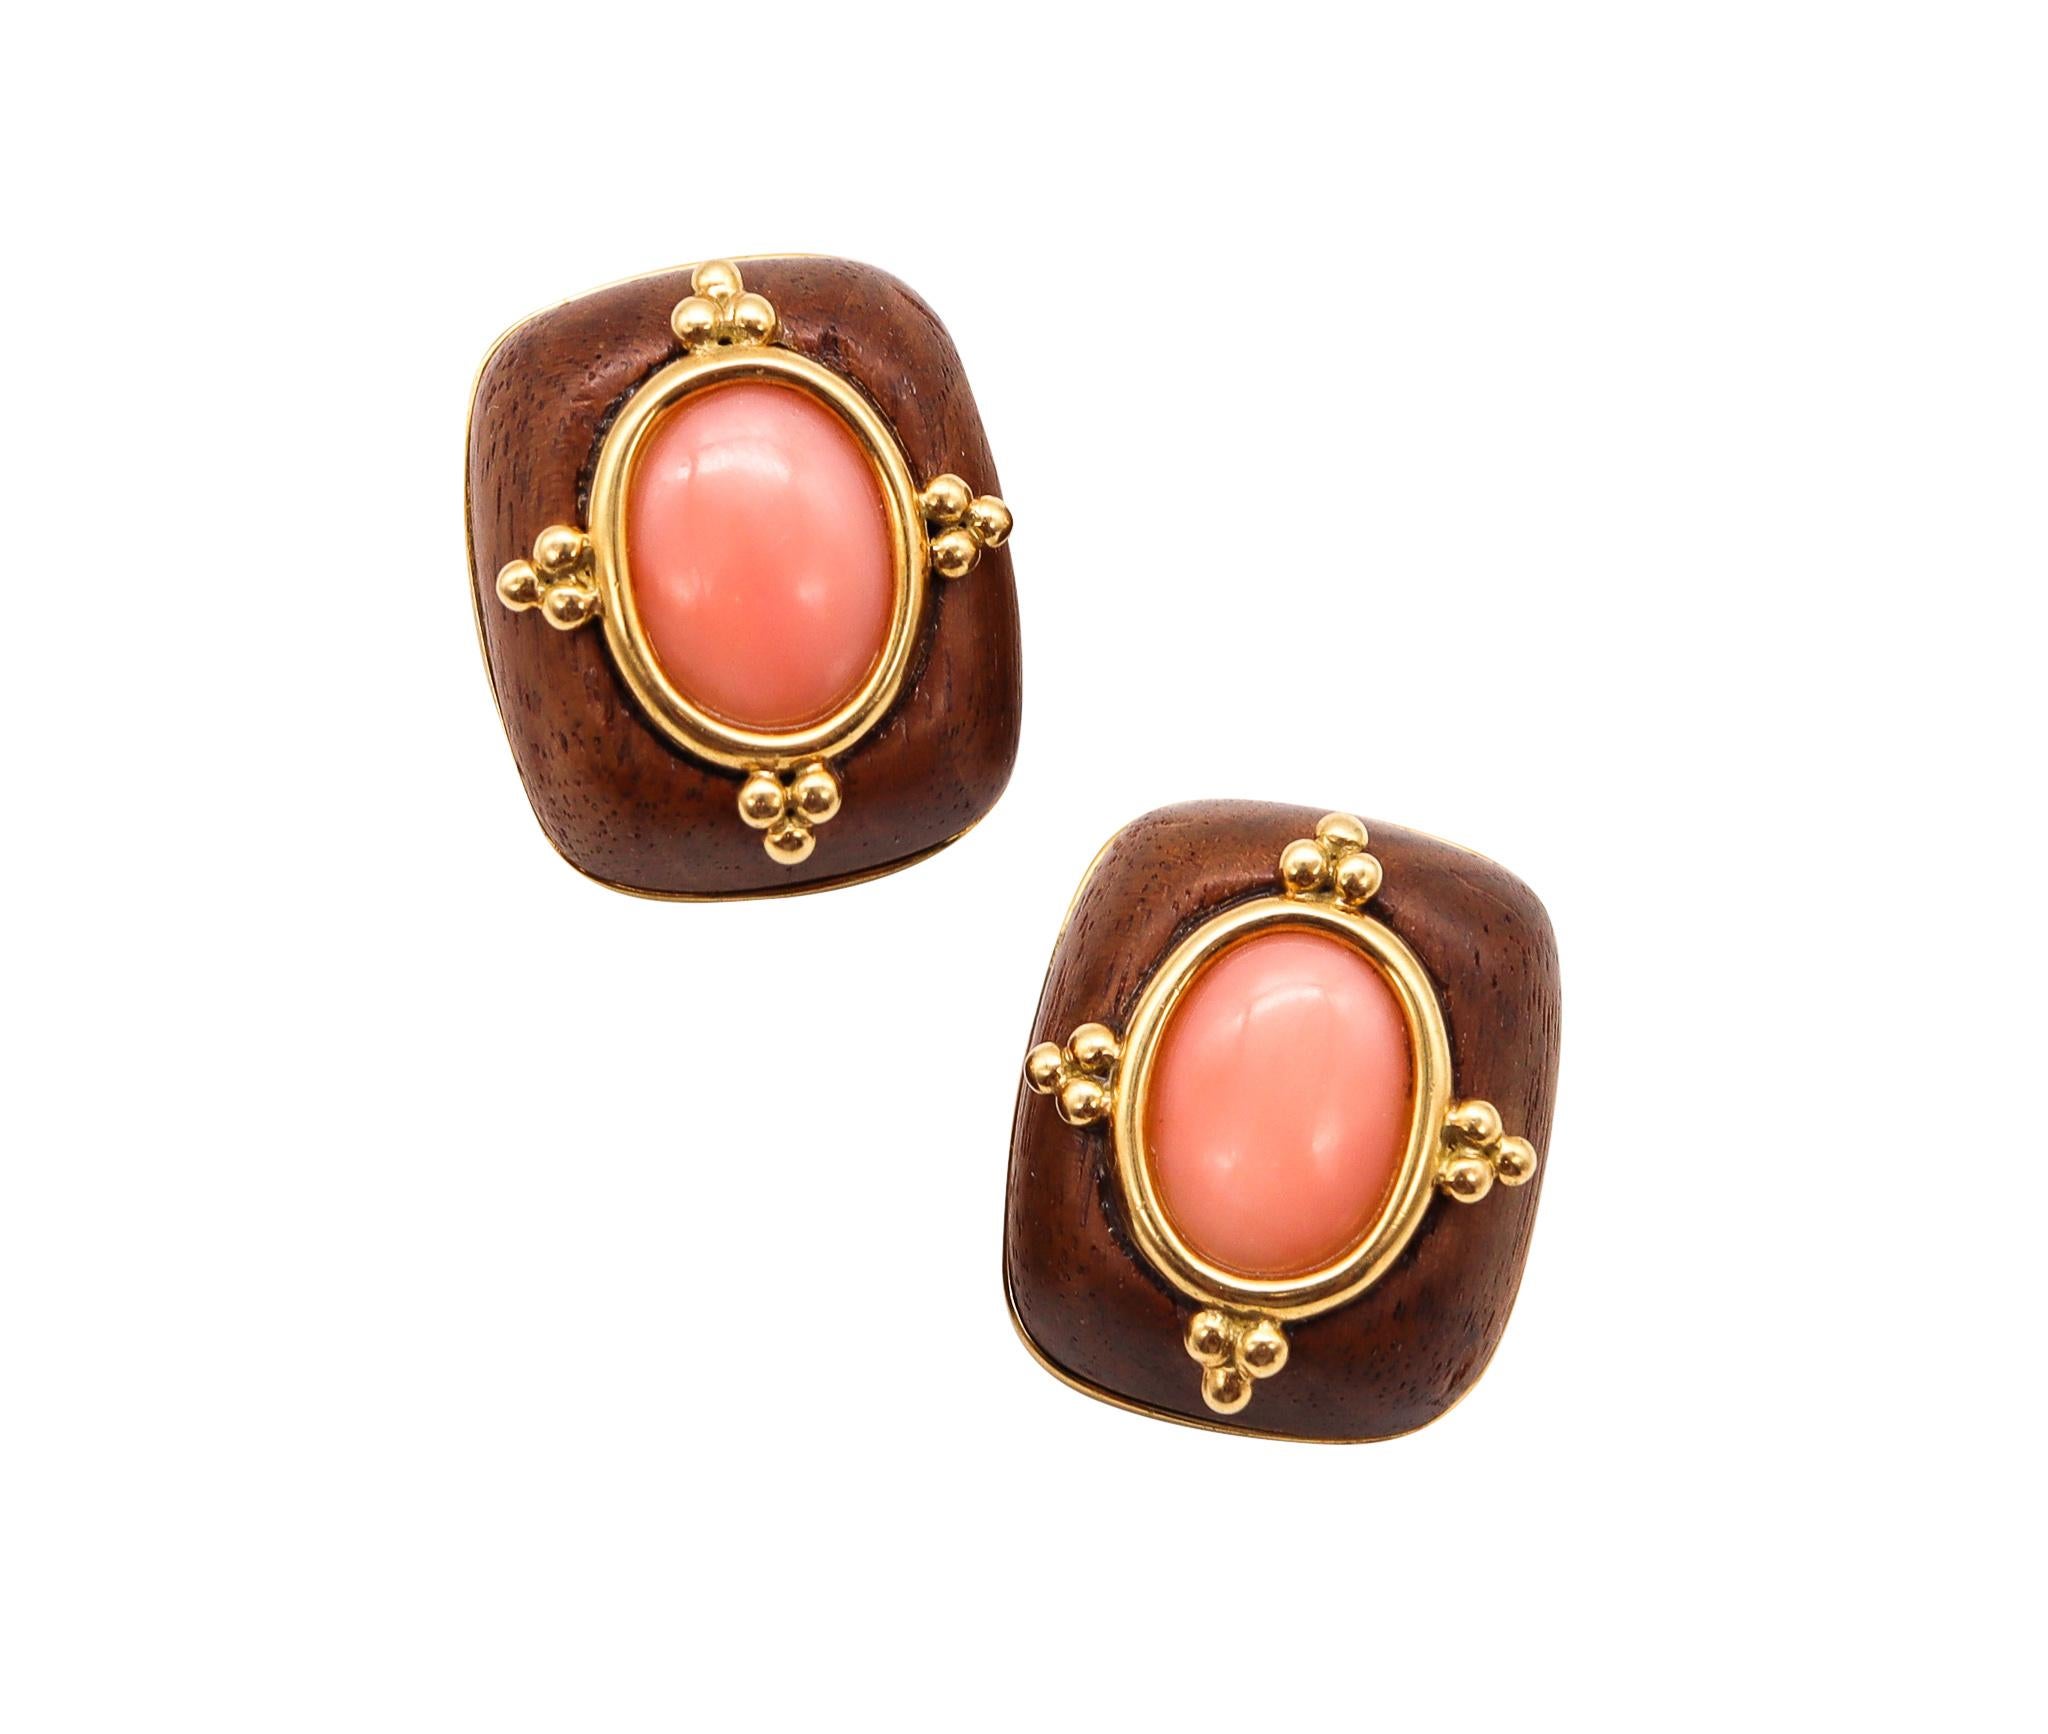 Cabochon Trianon Seaman Schepps Clip Earrings 18kt Gold with Carved Rose Wood and Coral